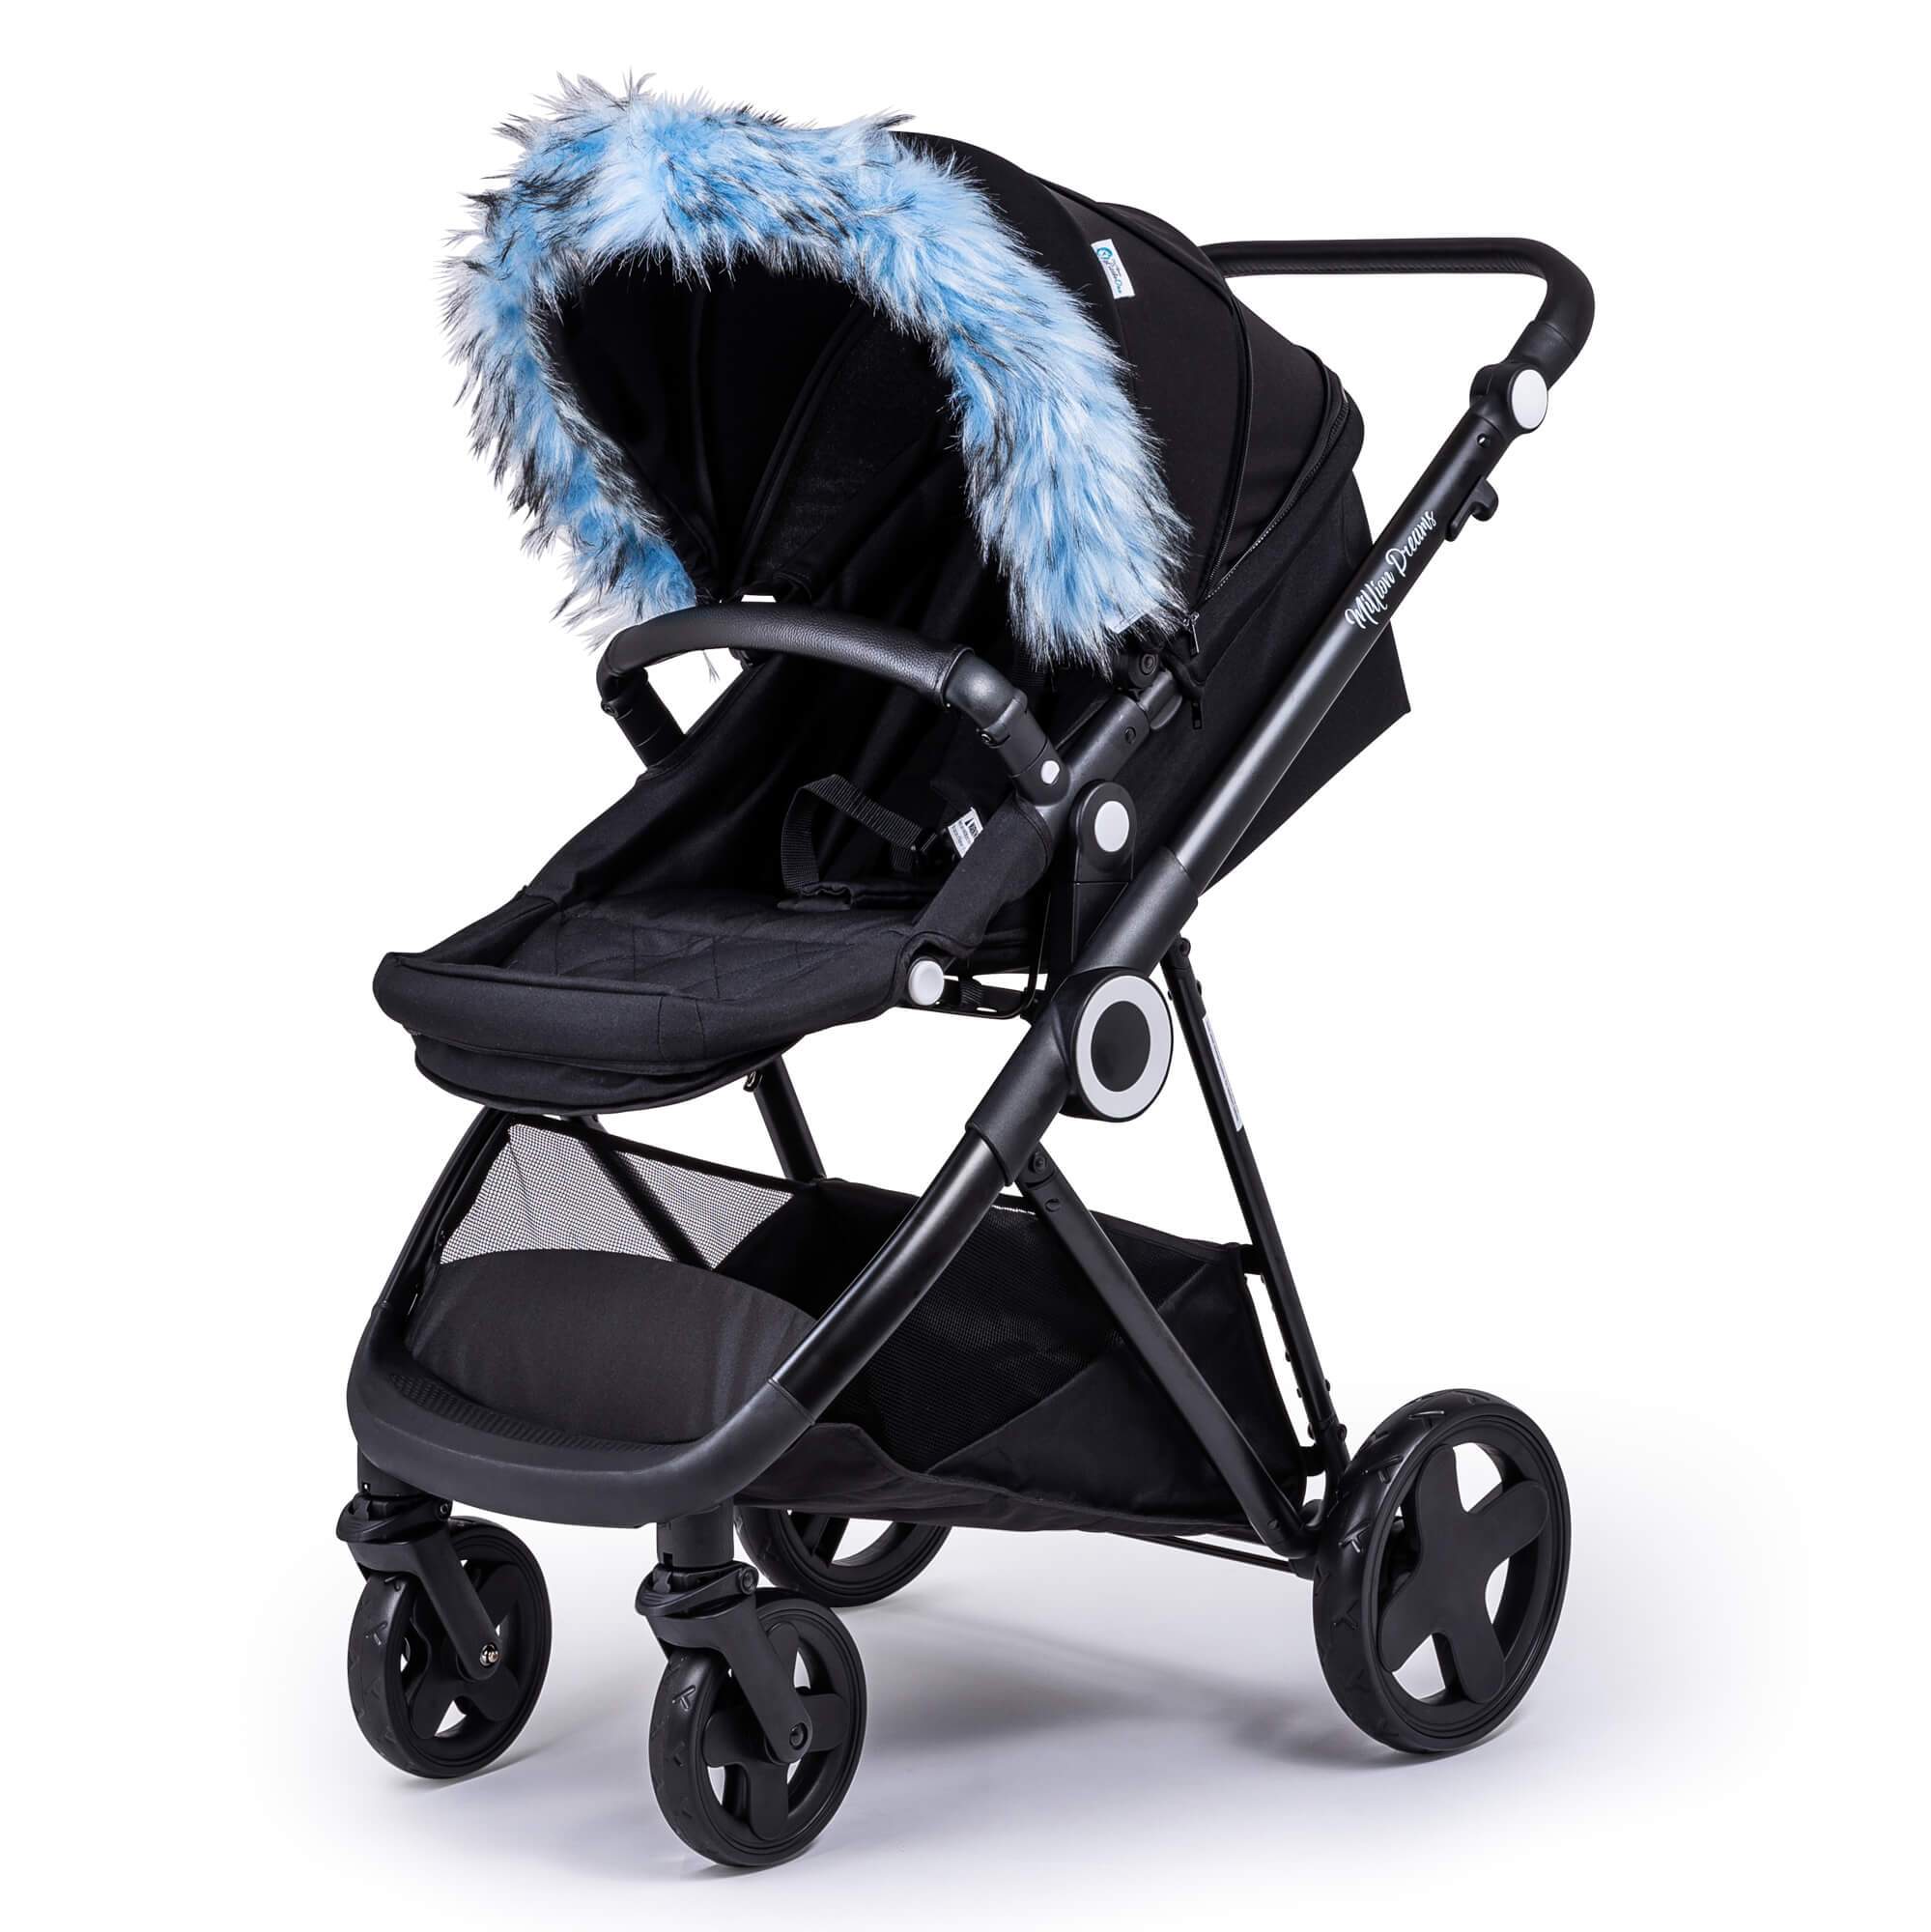 Pram Fur Hood Trim Attachment for Pushchair Compatible with Britax - Light Blue / Fits All Models | For Your Little One